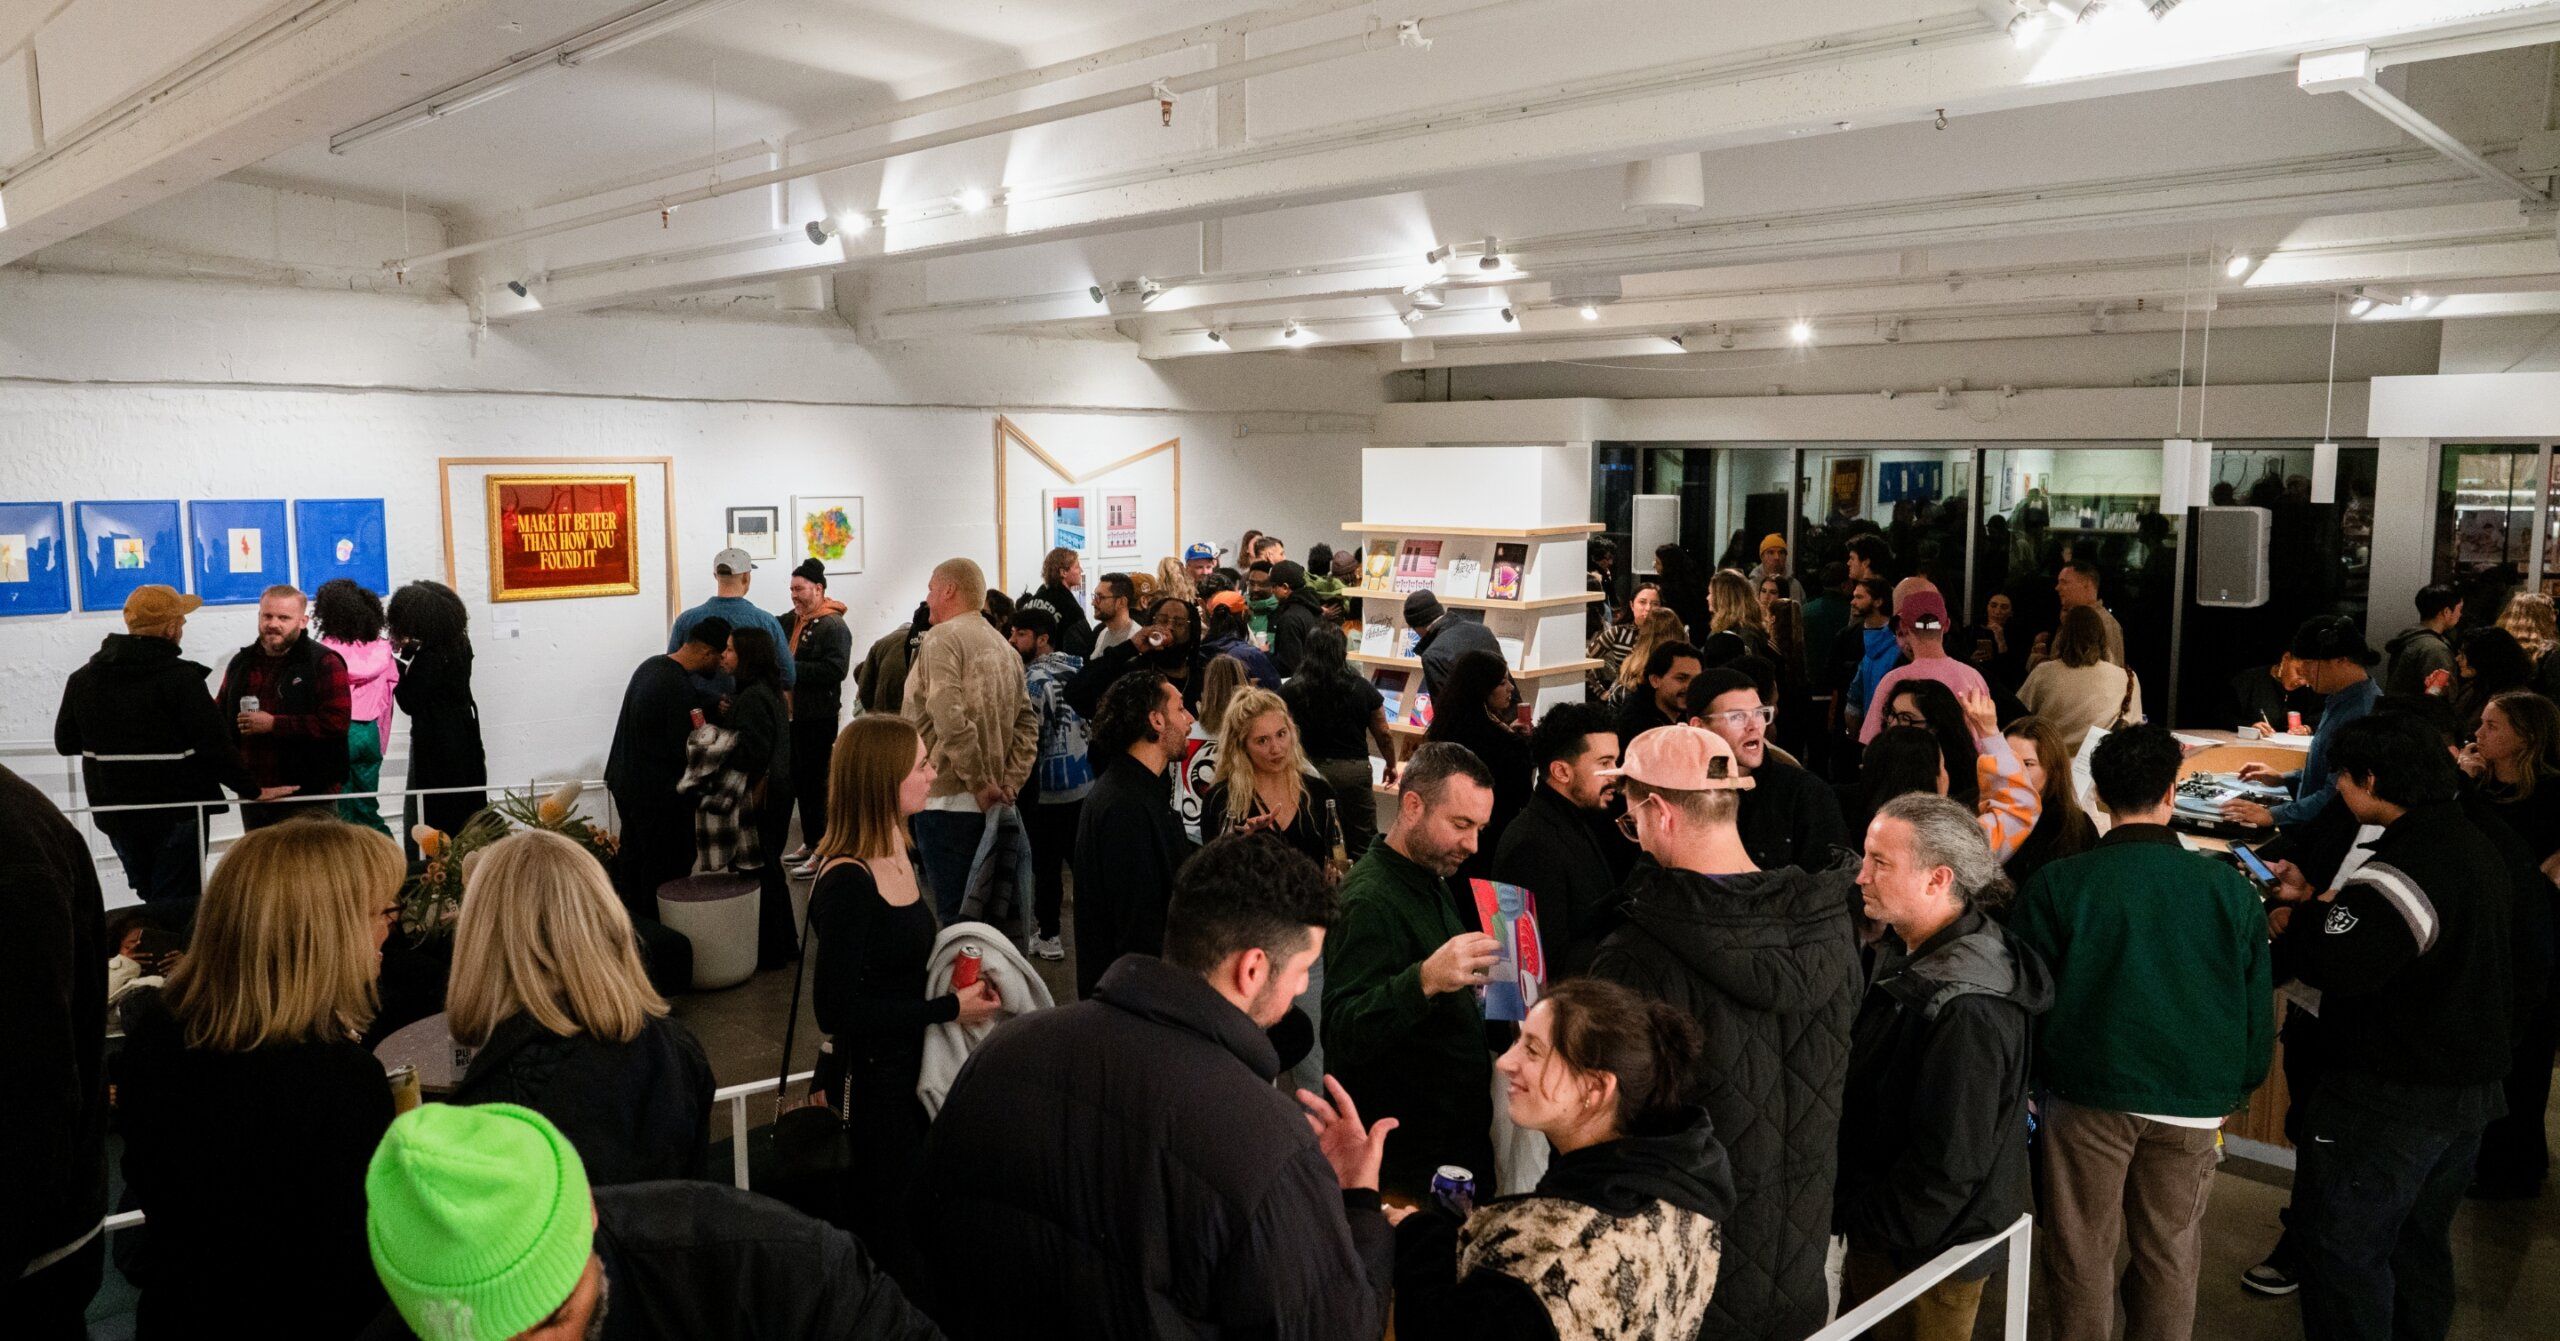 A crowd of people standing in an art gallery opening party.